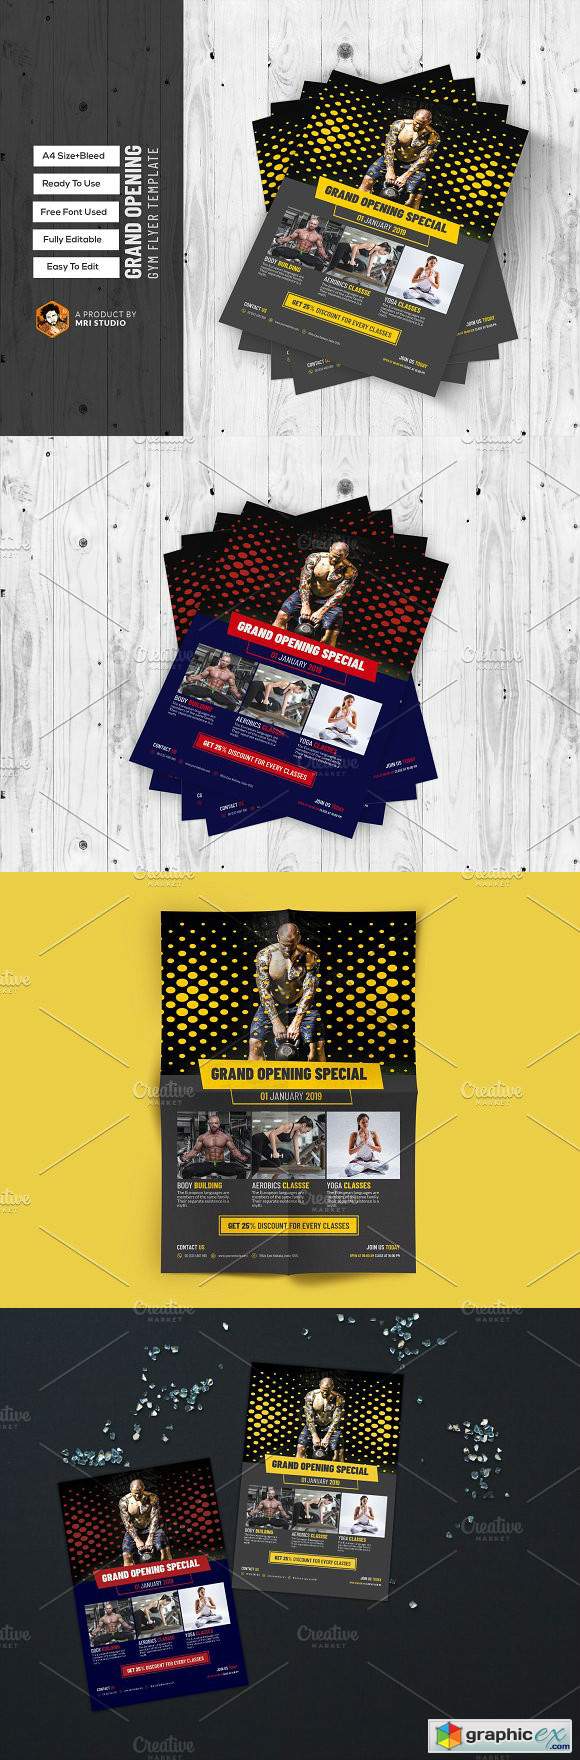 Grand Opening GYM Flyer Template